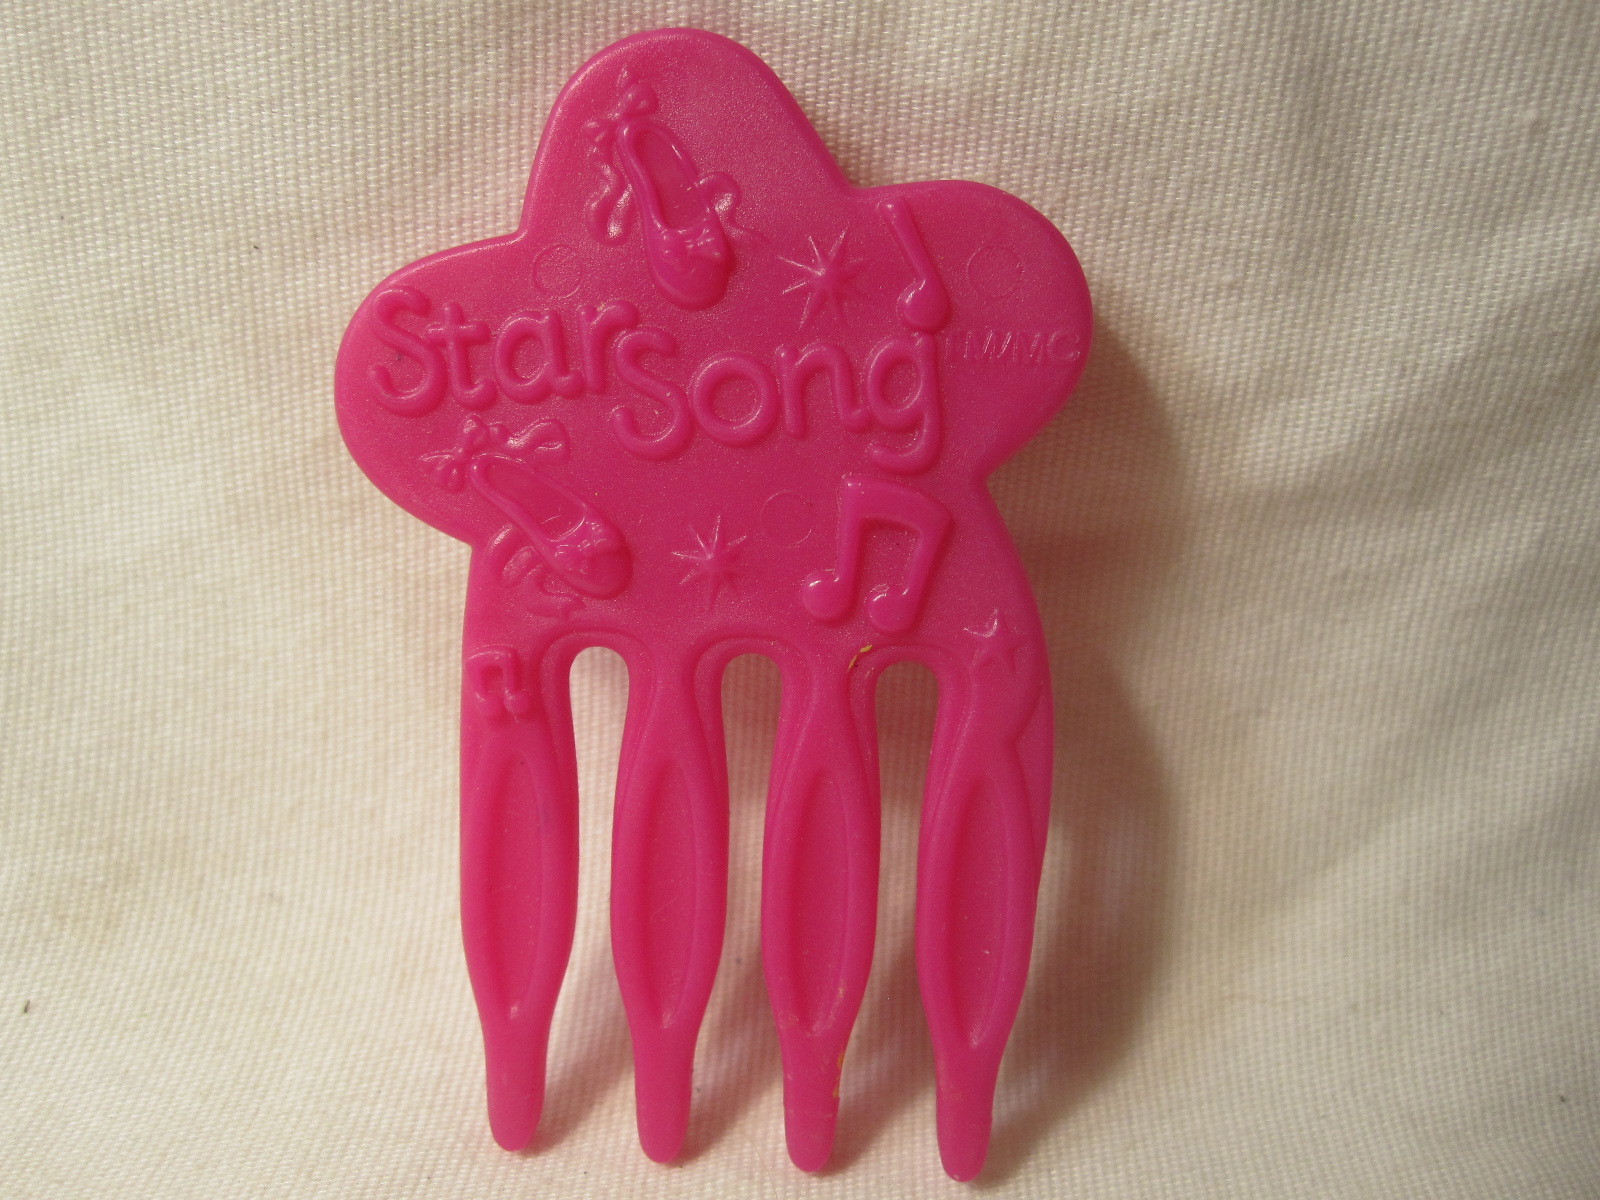 2009 My Little Pony accessory: Star Song Pink Brush - $2.00